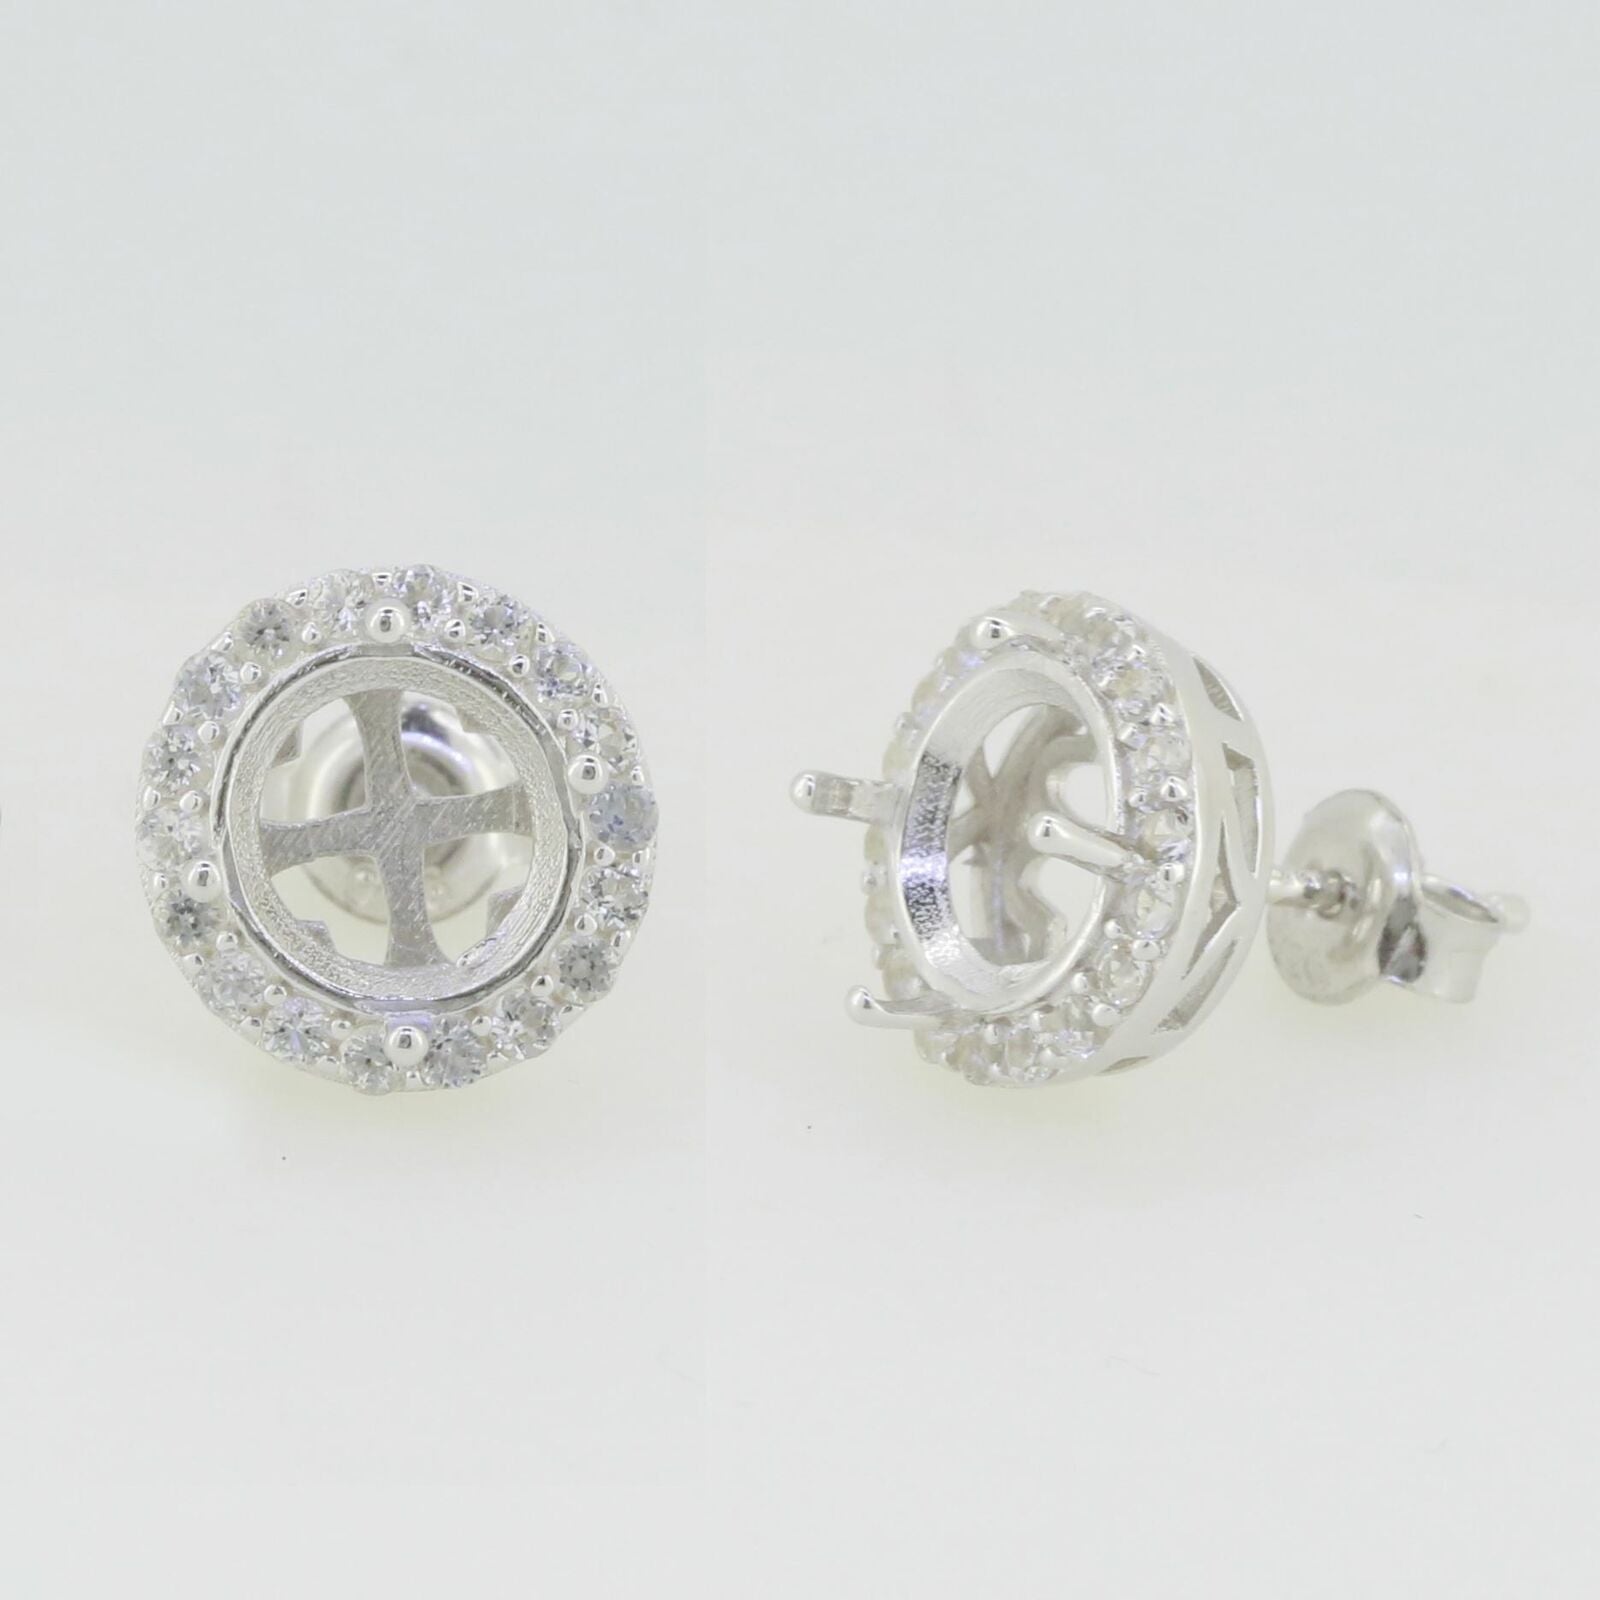 14K White Gold Semi Mount Earrings Setting Round RD 8x8mm Solid